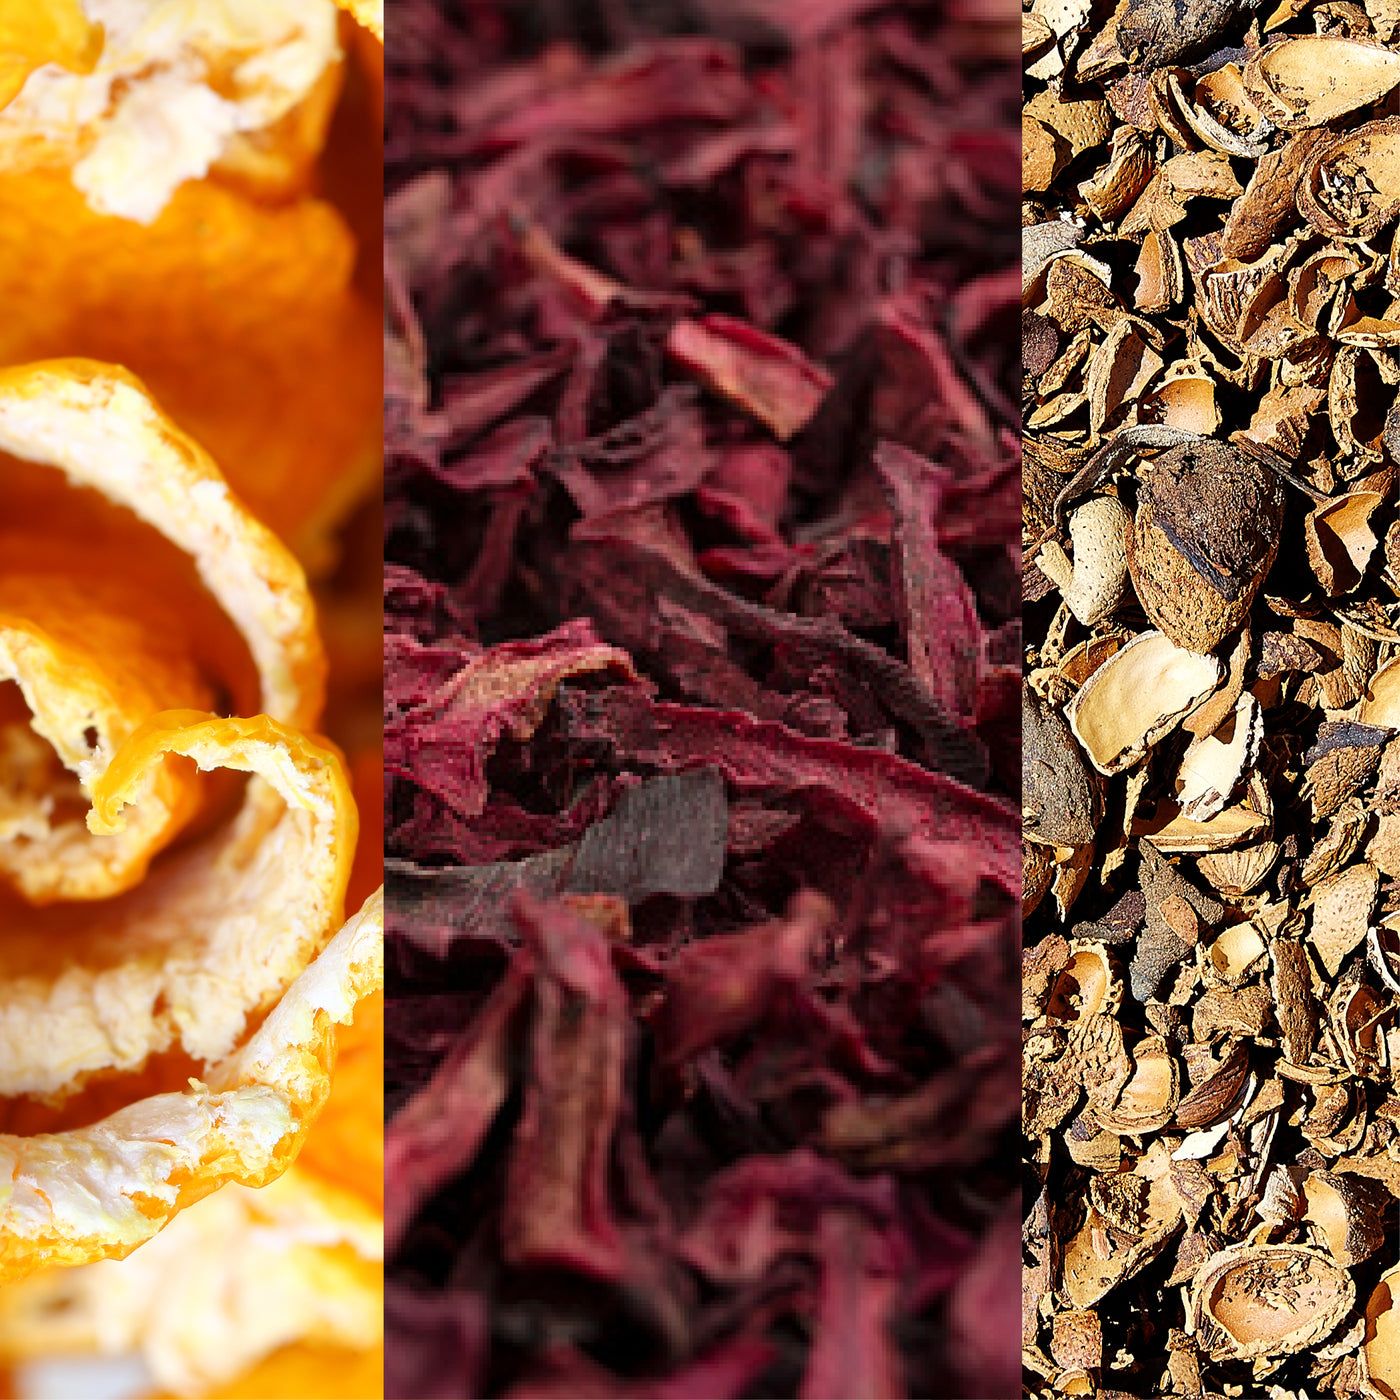 Images of orange, beet, and almond pieces 